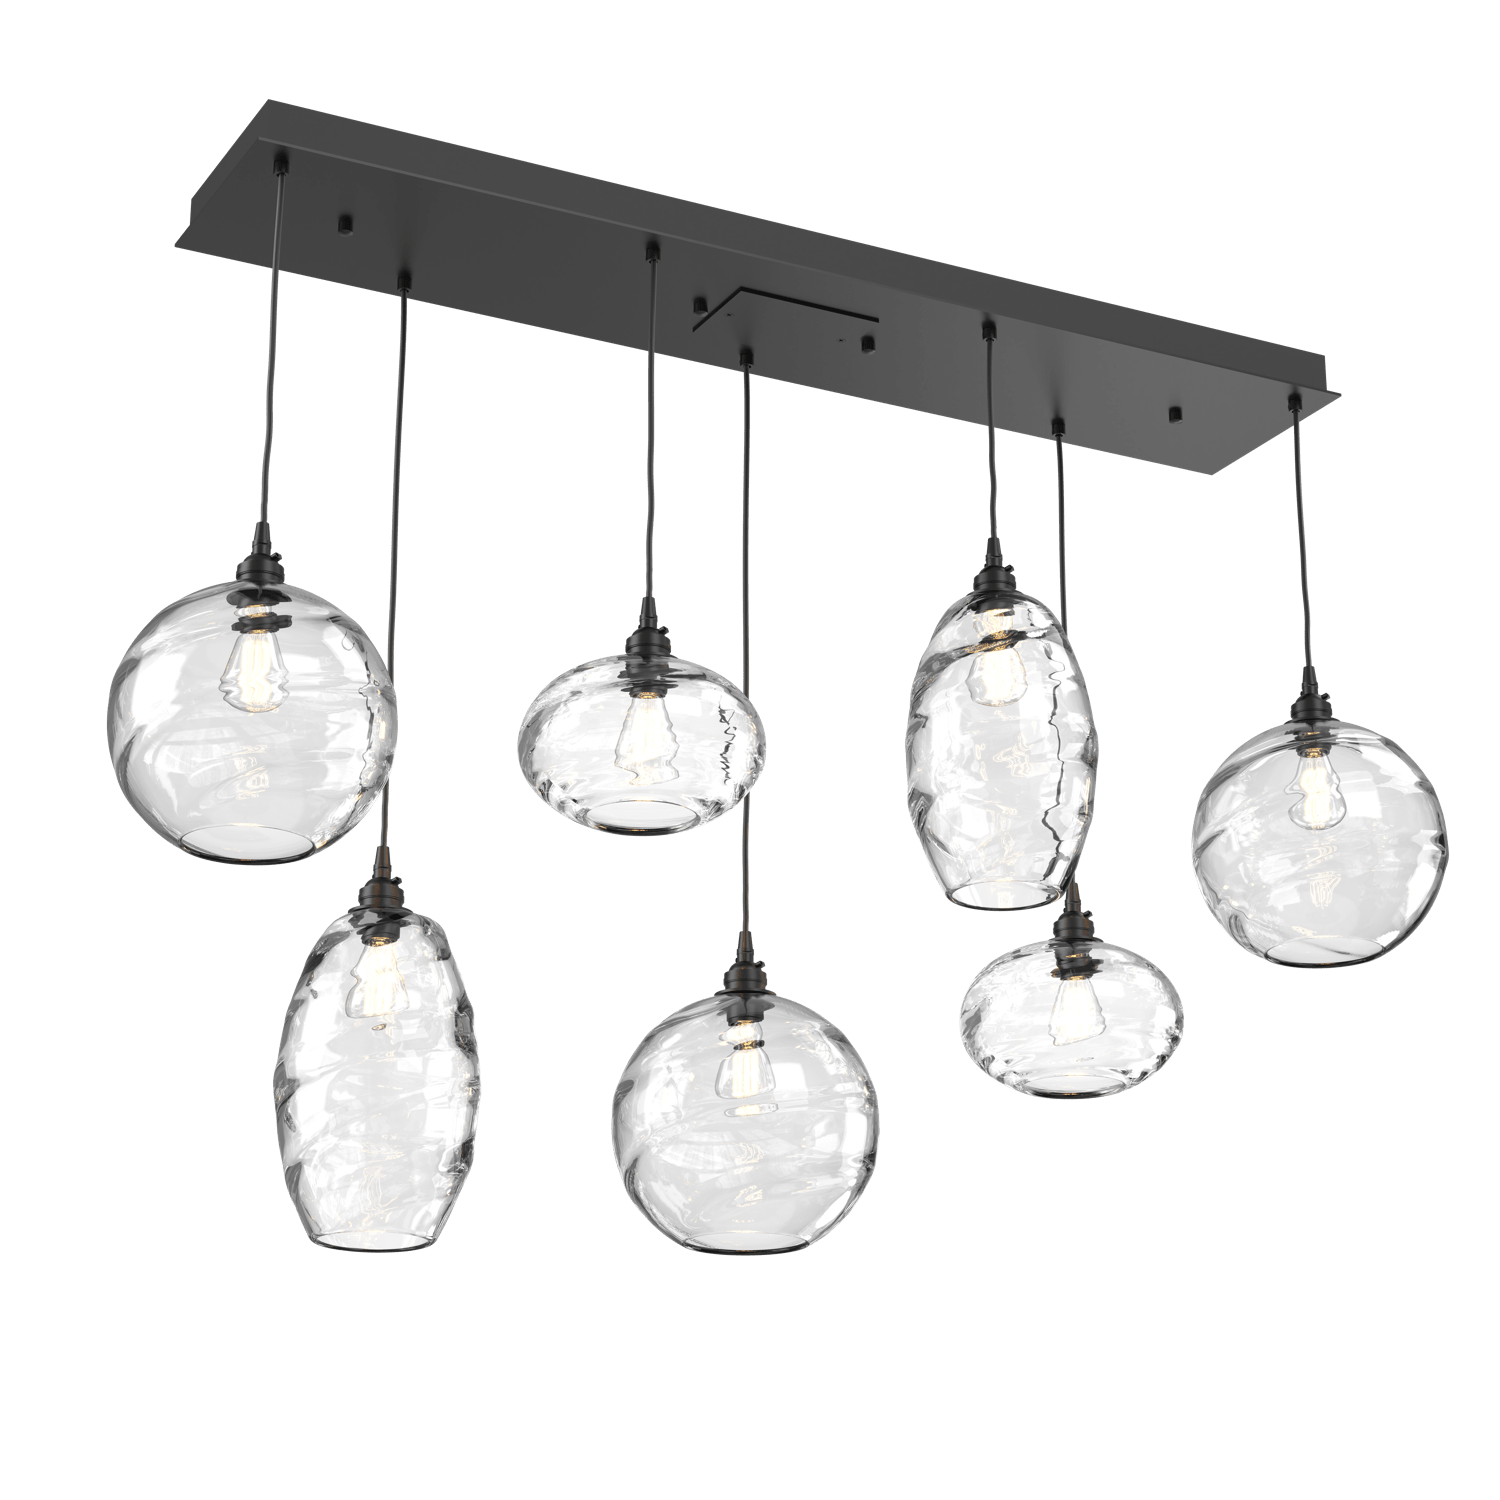 PLB0048-07-MB-OC-Hammerton-Studio-Optic-Blown-Glass-Misto-7-light-linear-pendant-chandelier-with-matte-black-finish-and-optic-clear-blown-glass-shades-and-incandescent-lamping